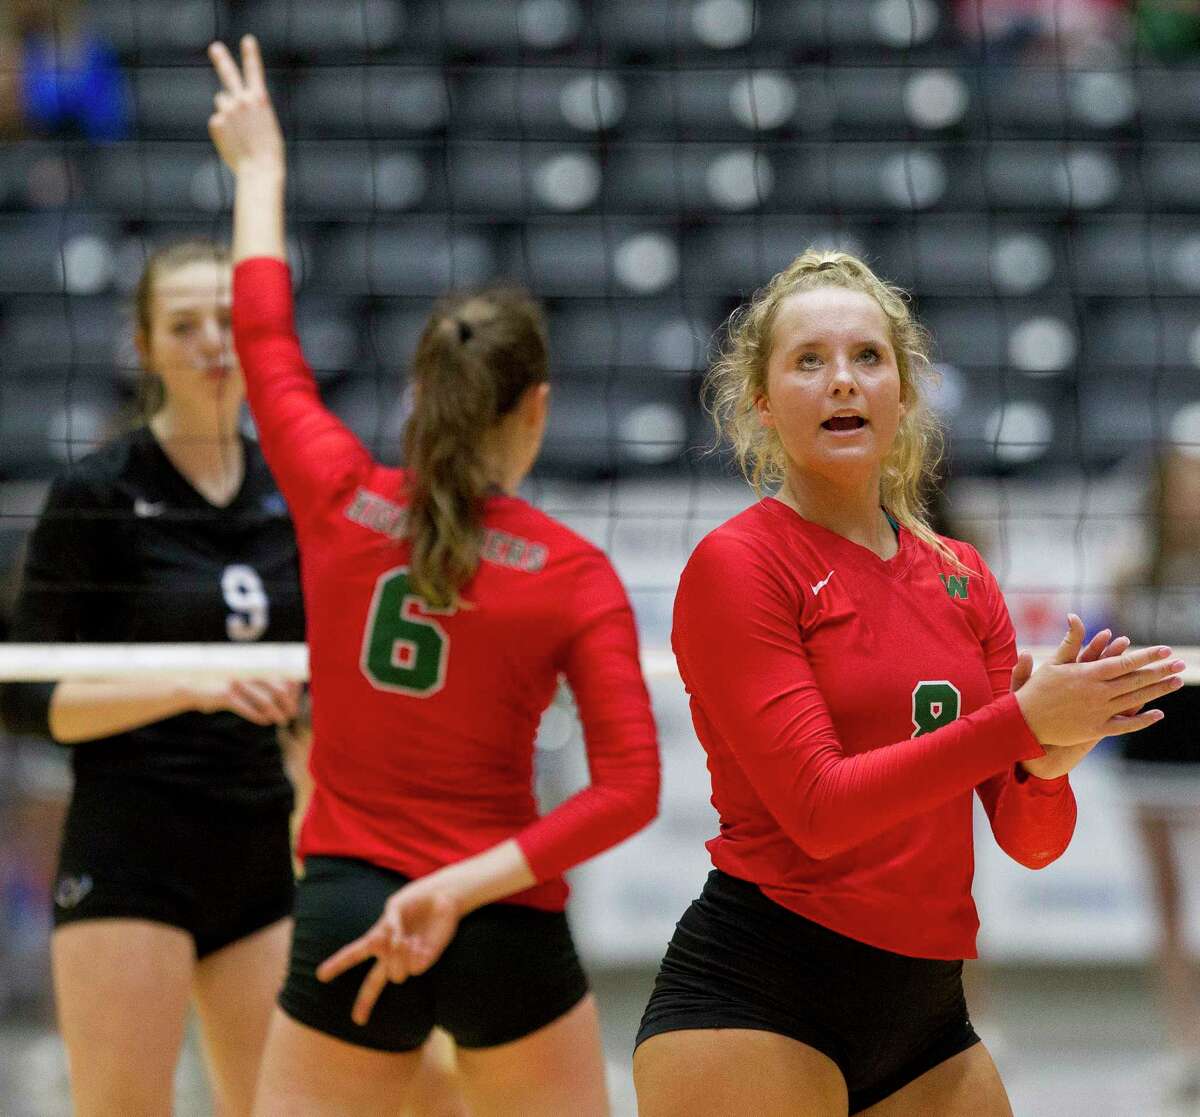 The Woodlands setter Sophie Walls (8) looks up at the scoreboard during the second set of a Class 6A semifinal volleyball match at the UIL state tournament, Friday, Nov. 17, 2017, in Garland.